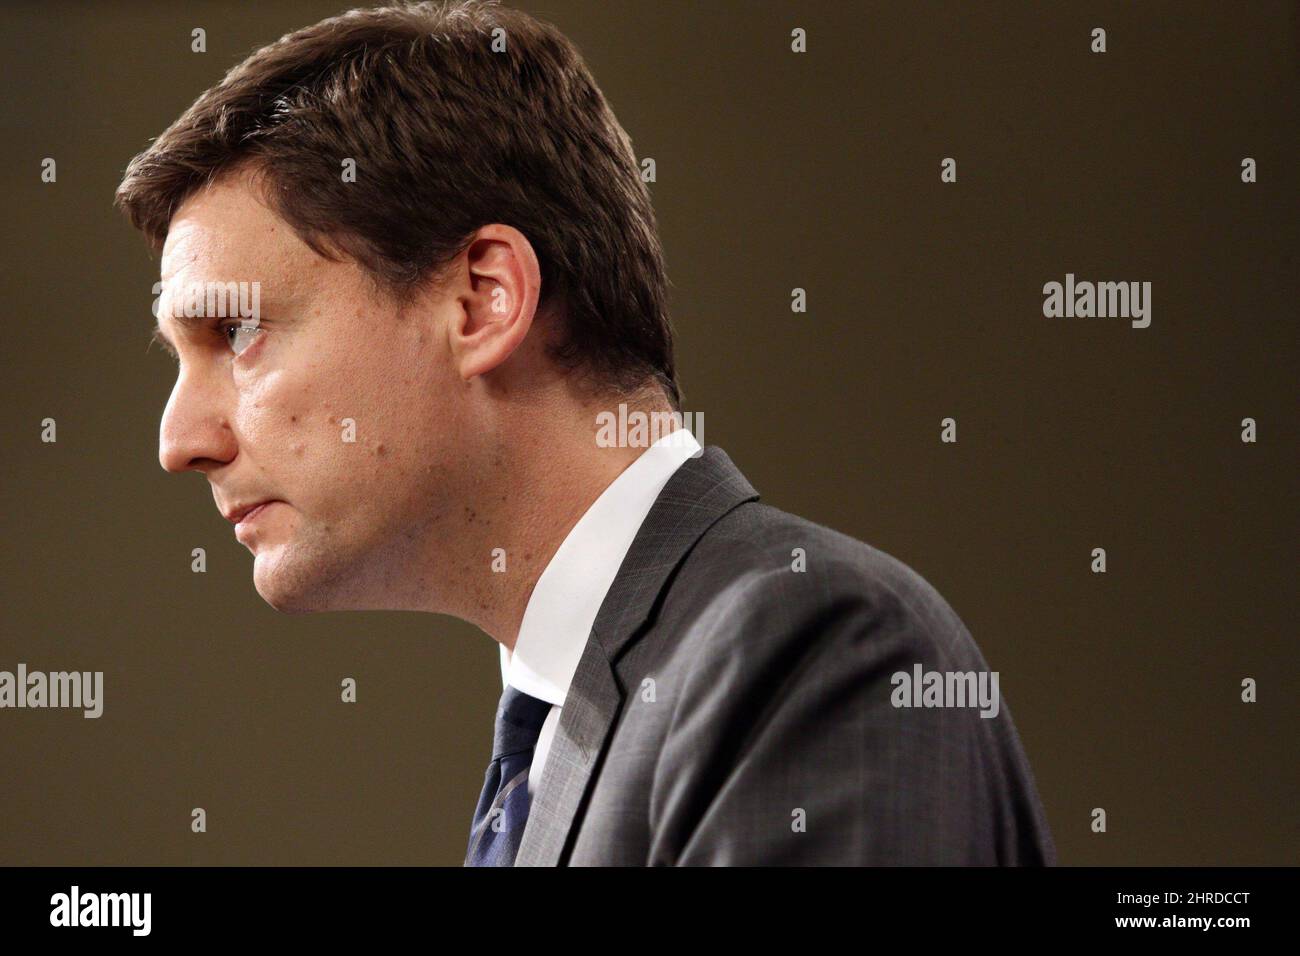 Attorney General David Eby speaks to media during a press conference at Legislature in Victoria, B.C., on September 18, 2017. British Columbia's attorney general says the appearance of discriminatory posters at the University of Victoria campus are reminders of the need to fight racism in its overt and subtle forms. David Eby says racism and discrimination can be overt in the presence of hate-filled posters, flyers and public protests, but there are also subtle forms where people are denied opportunities due to their ethnicity or economic standing. THE CANADIAN PRESS/Chad Hipolito Stock Photo